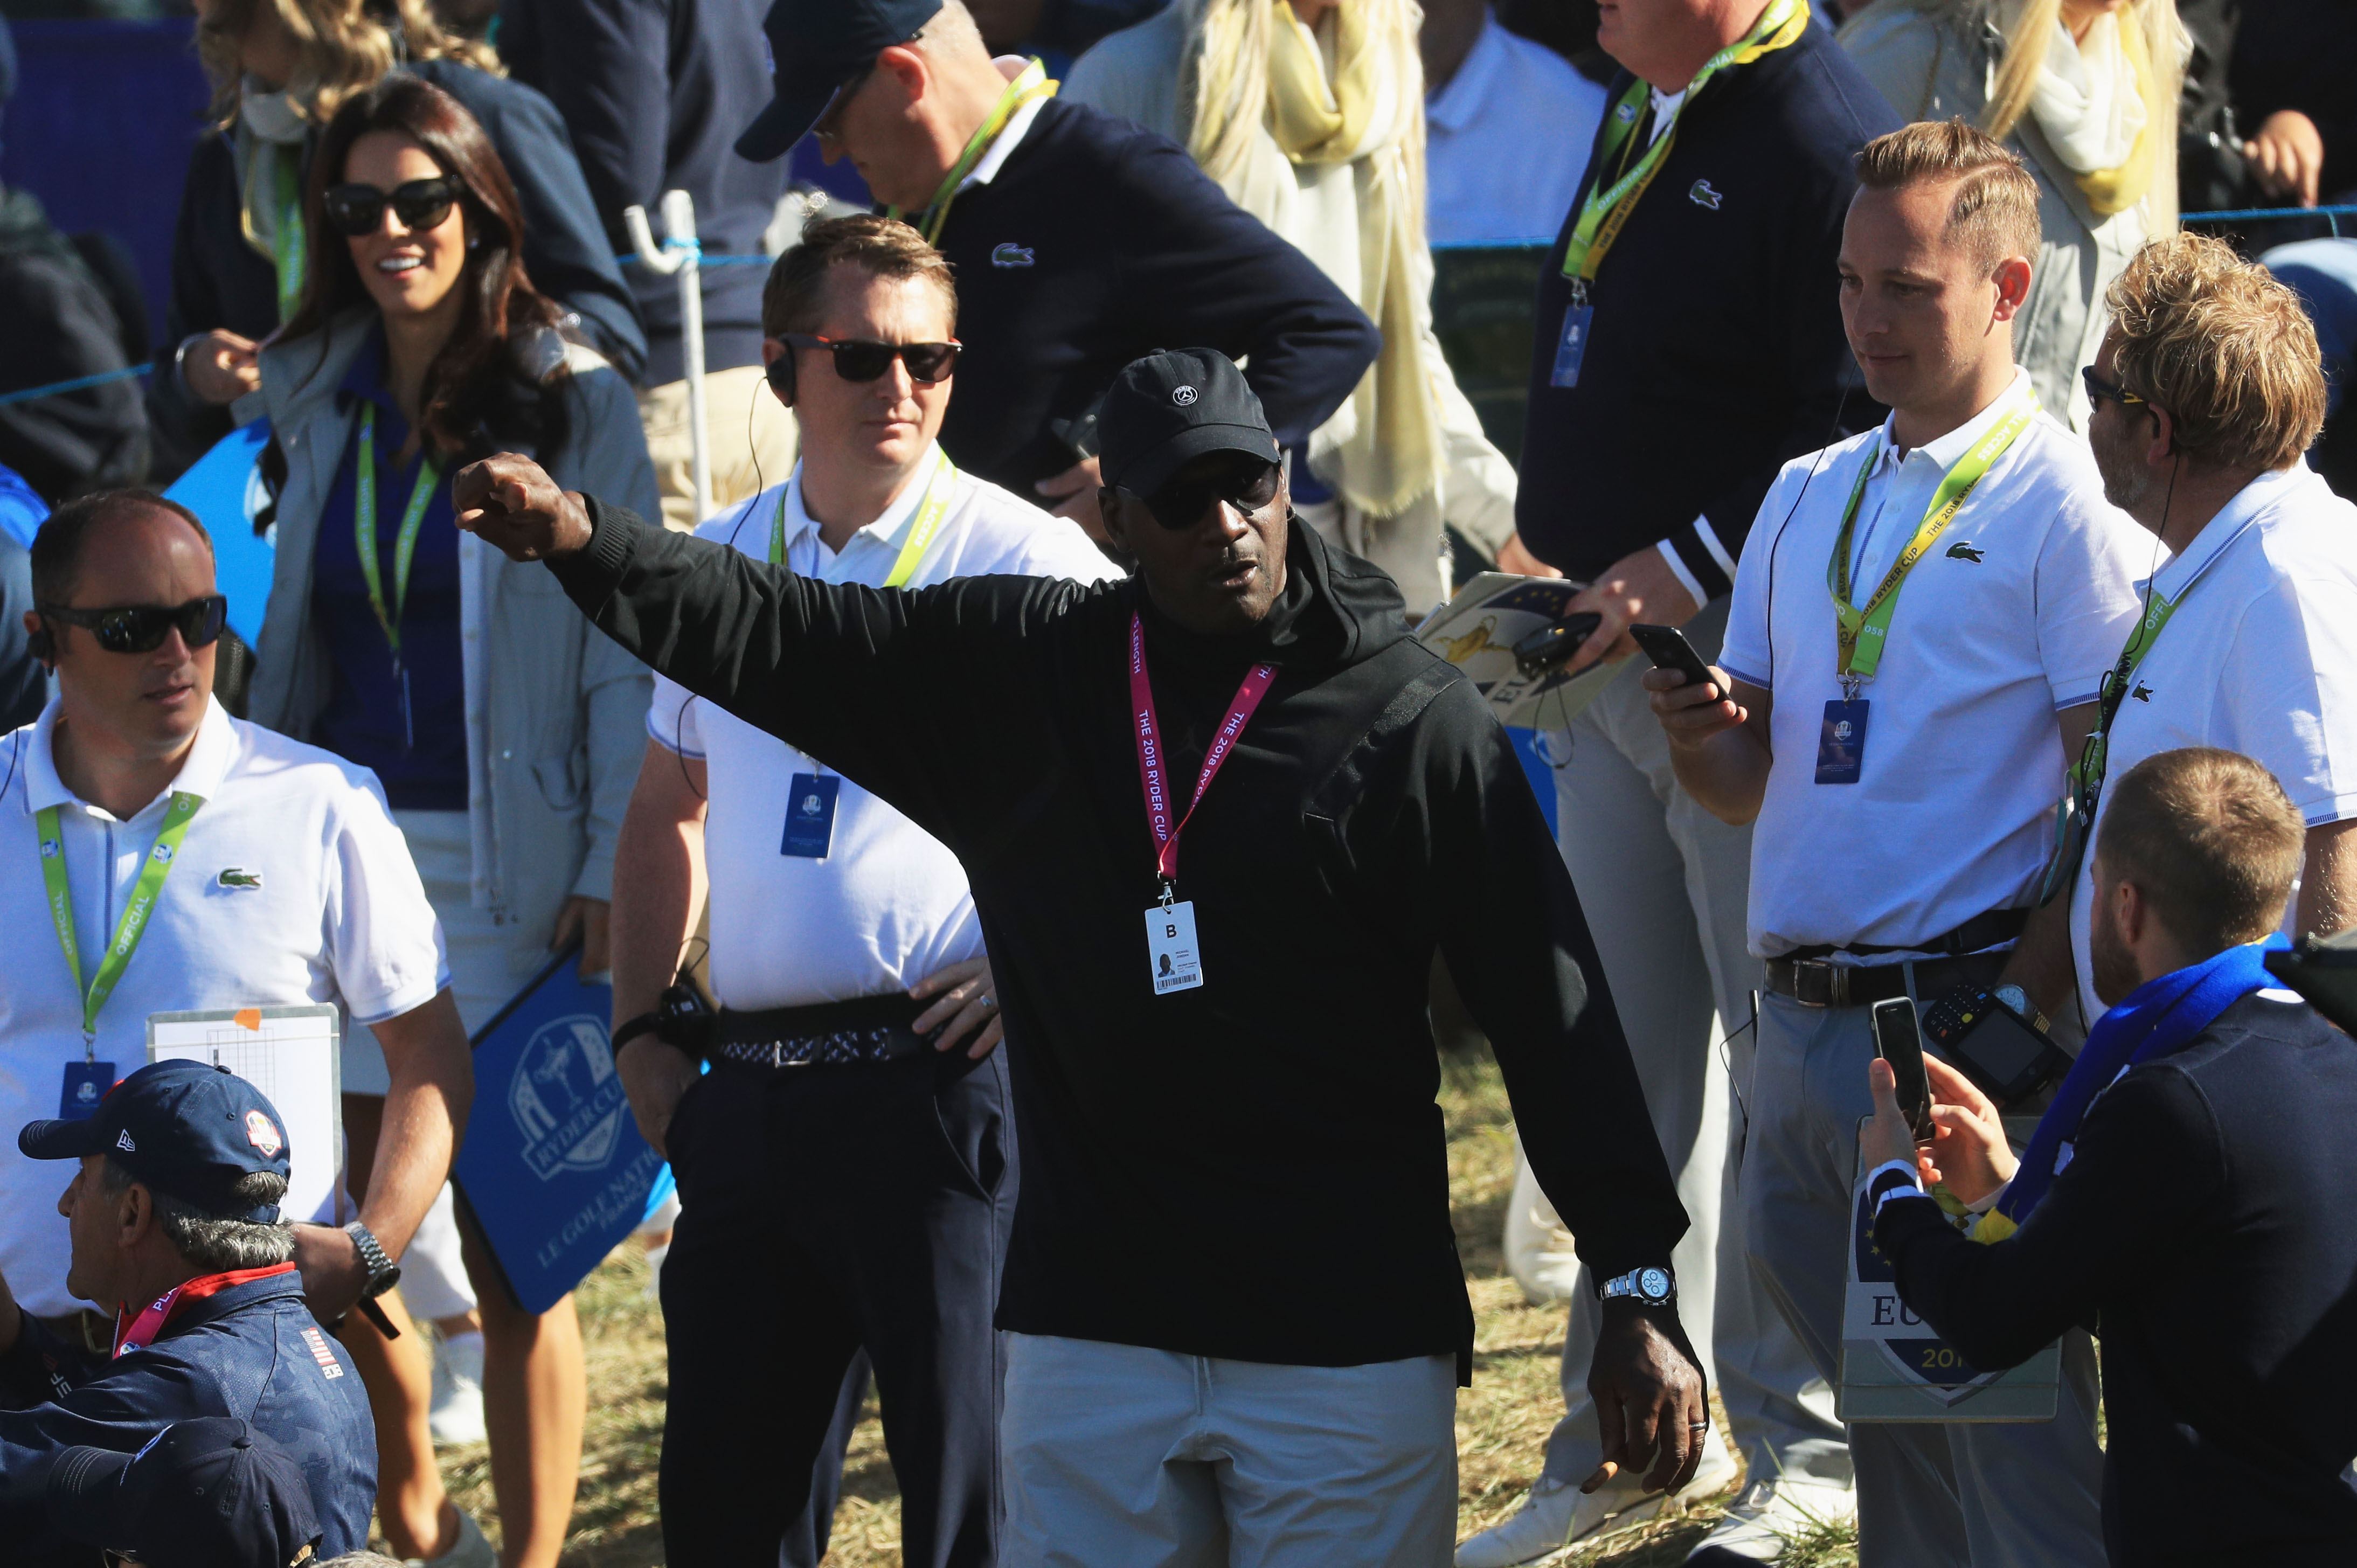 Michael Jordan at the 2018 Ryder Cup golf tournament in France.